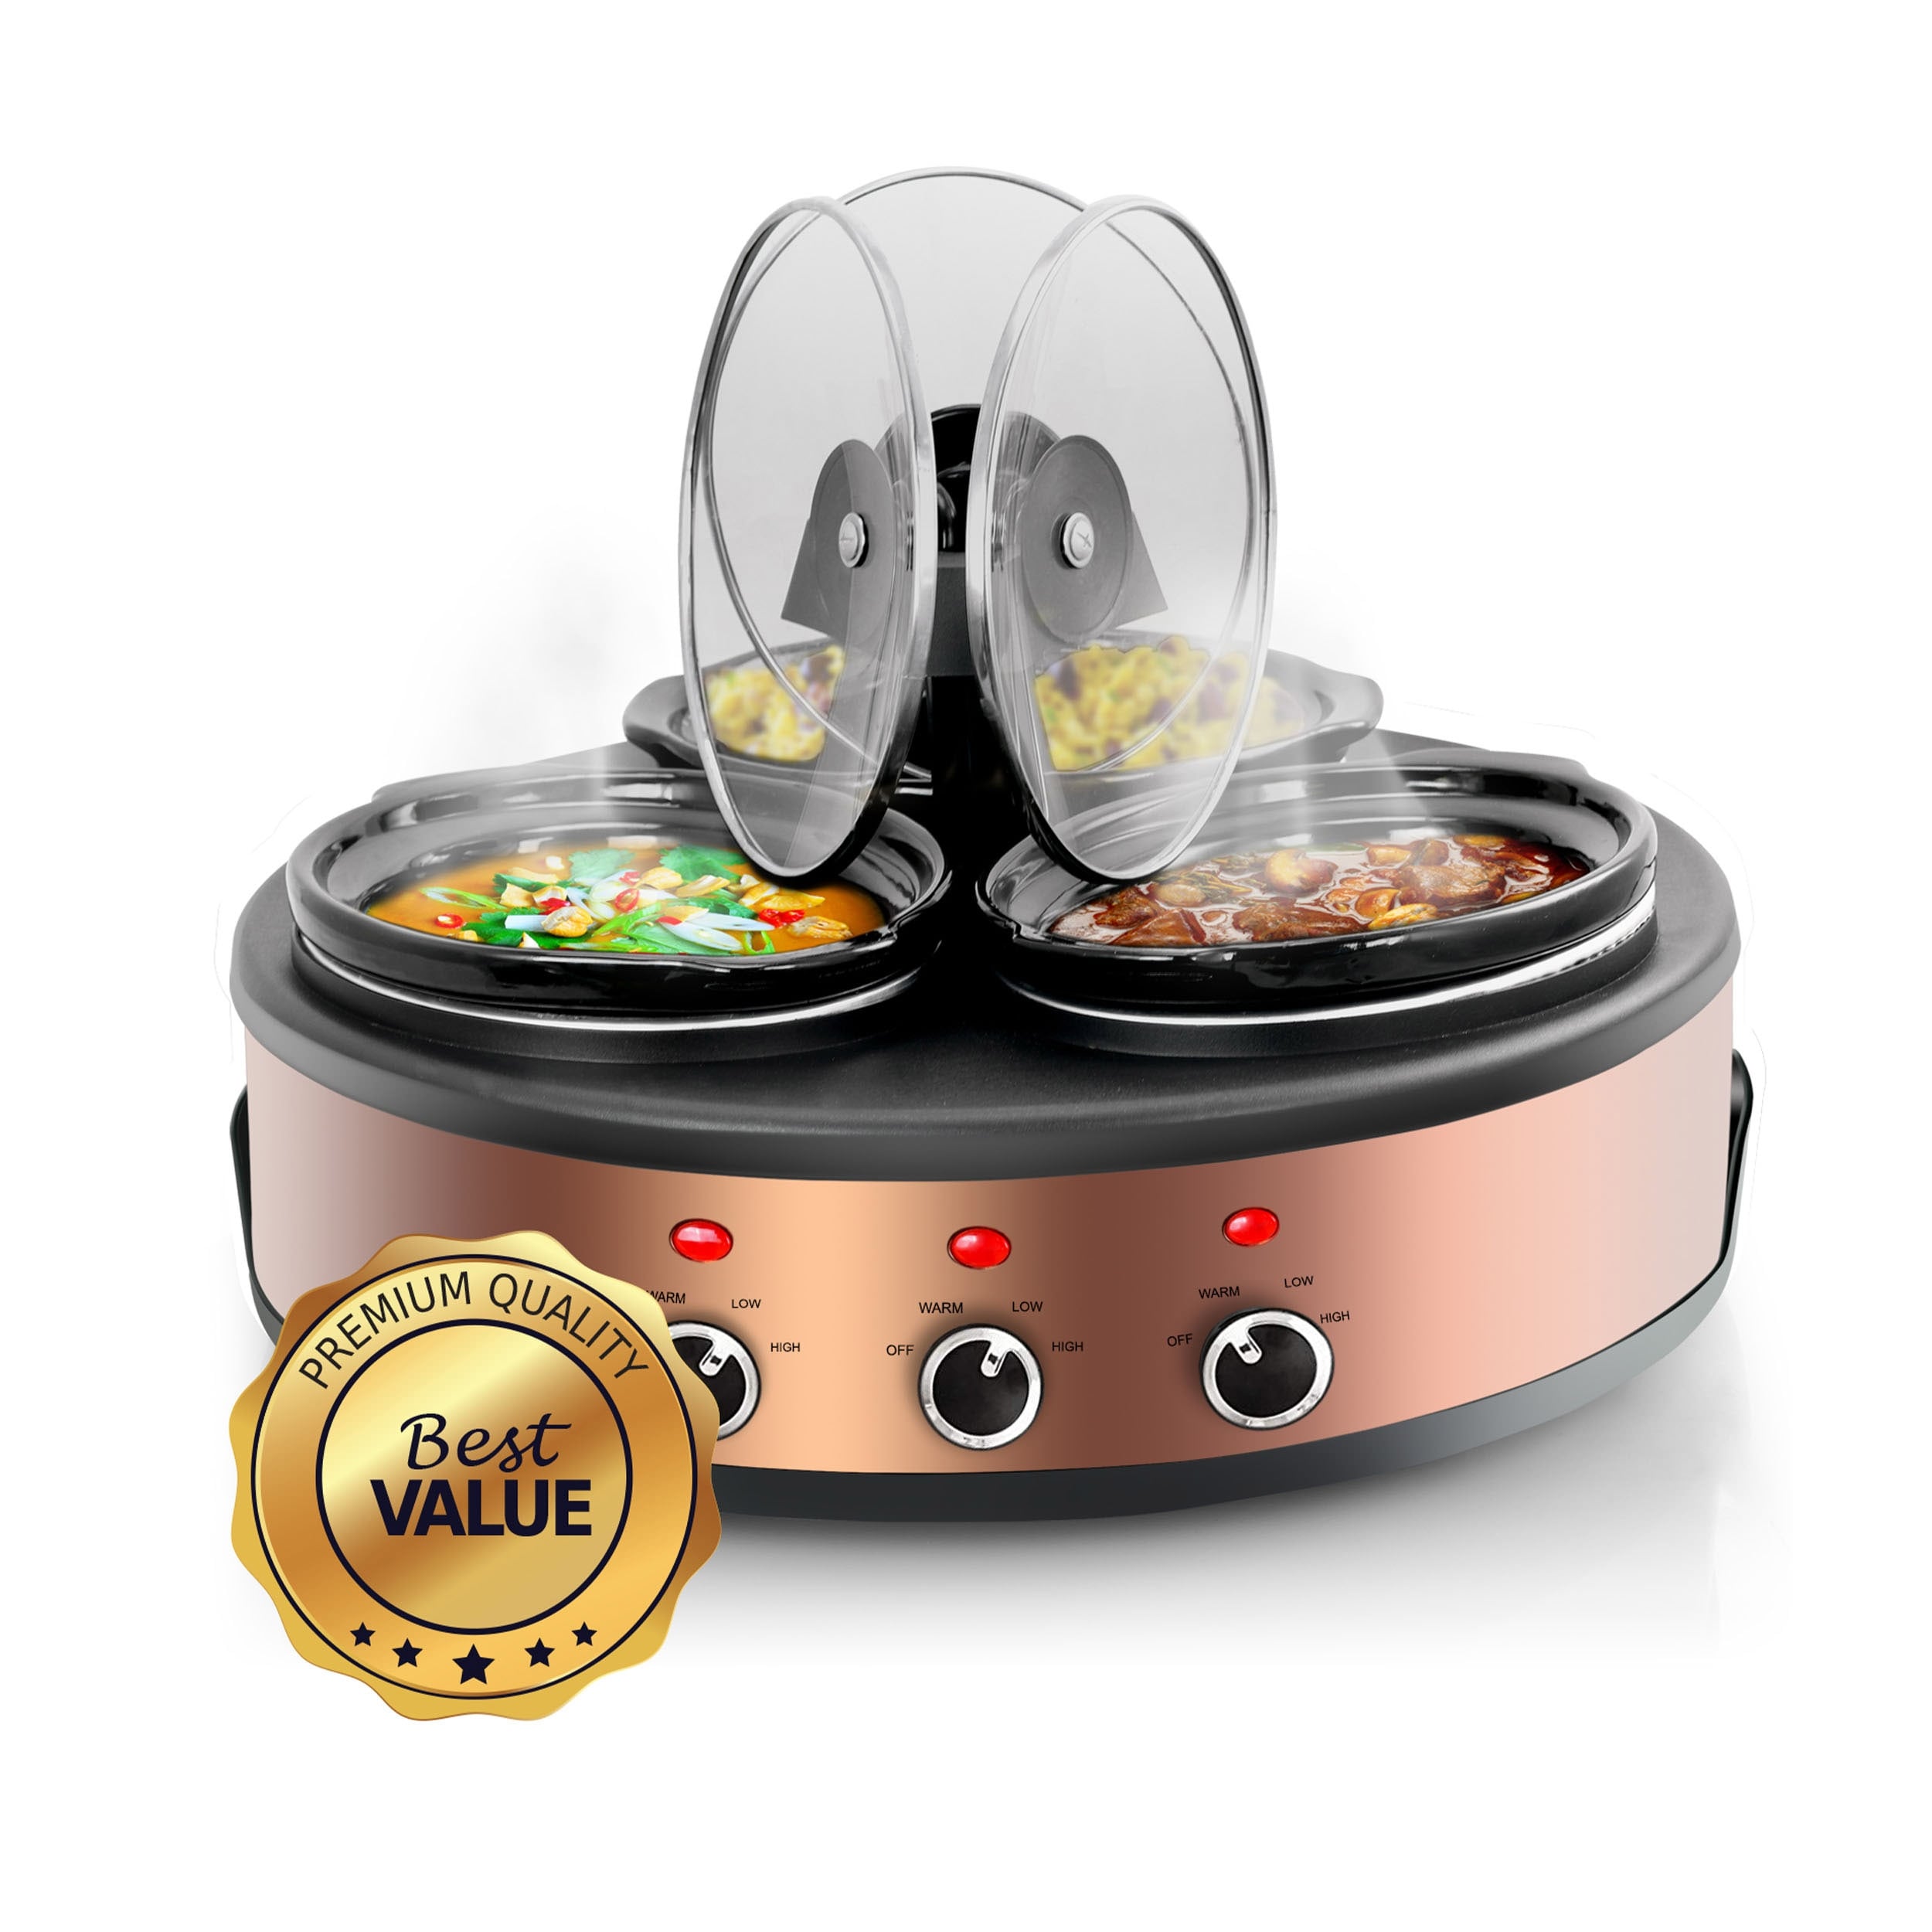 https://ak1.ostkcdn.com/images/products/is/images/direct/3db7e05c44ba98ac051a022f6cf44a7b6484f7d8/MegaChef-Circular-Buffet-Slow-Cooker-w--Triple-1.5-Quart-Cooking-Pots.jpg